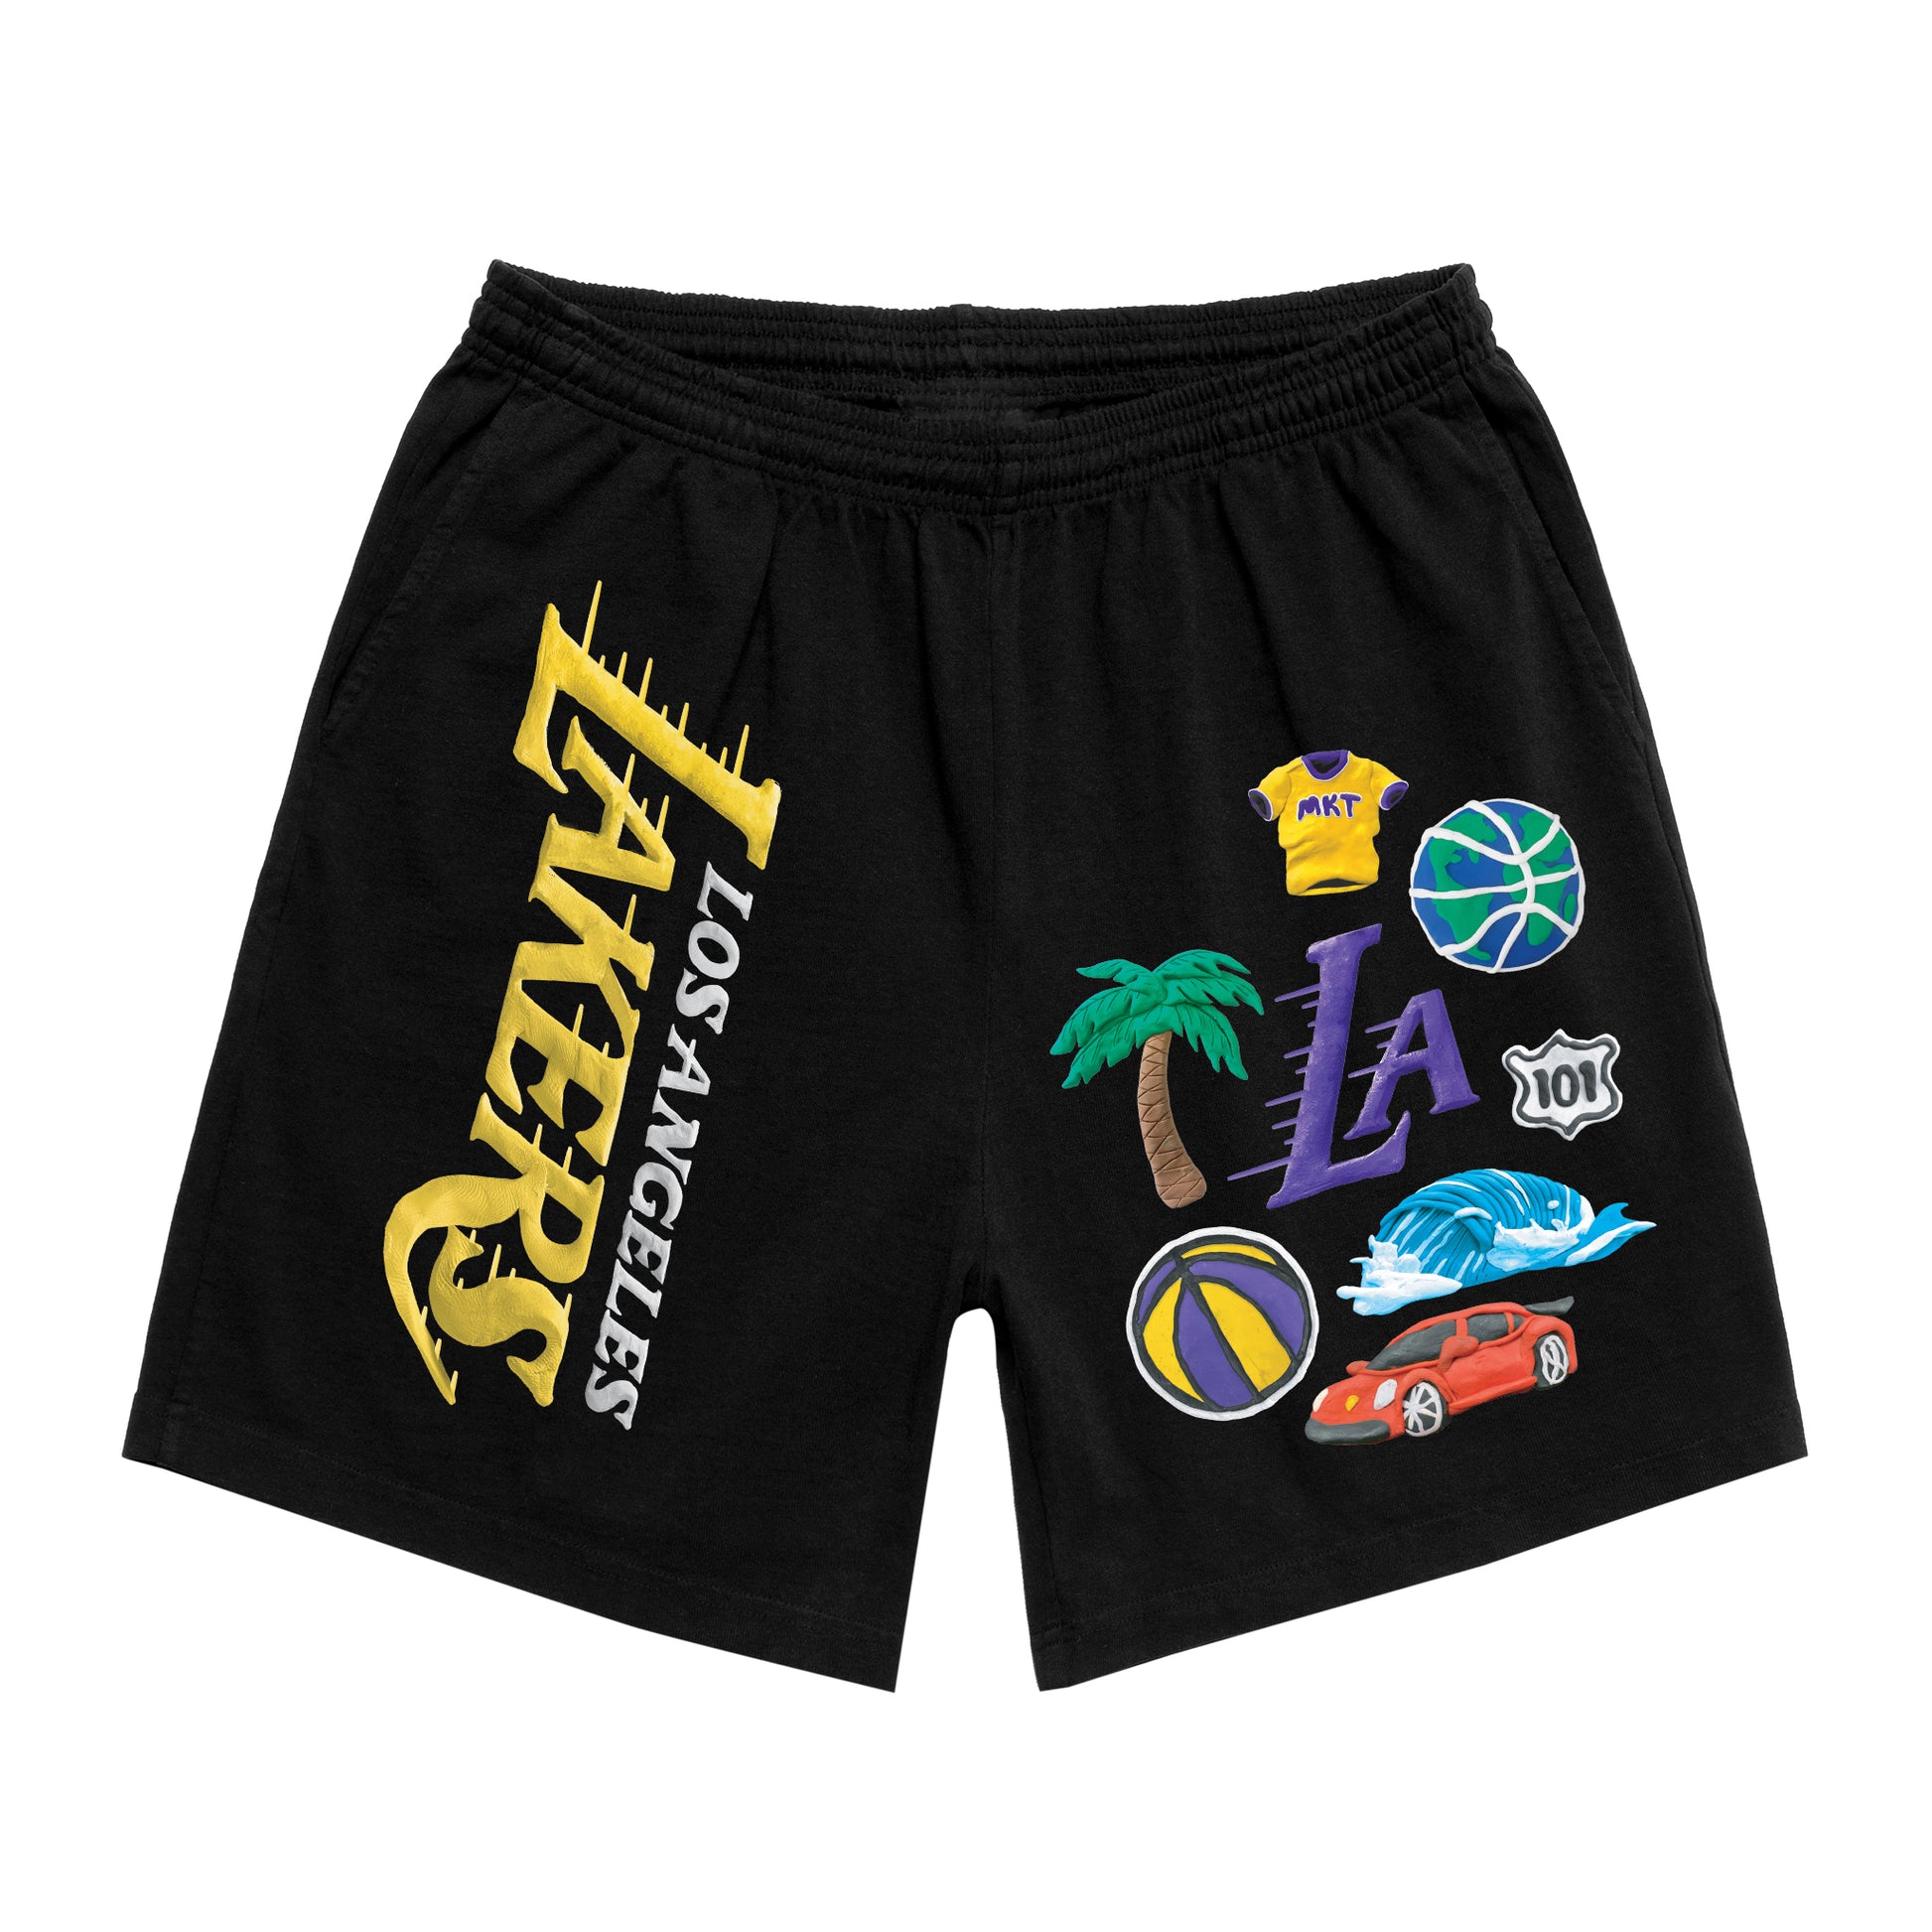 MARKET clothing brand MARKET LAKERS SWEATSHORTS. Find more graphic tees, sweatpants, shorts and more bottoms at MarketStudios.com. Formally Chinatown Market. 